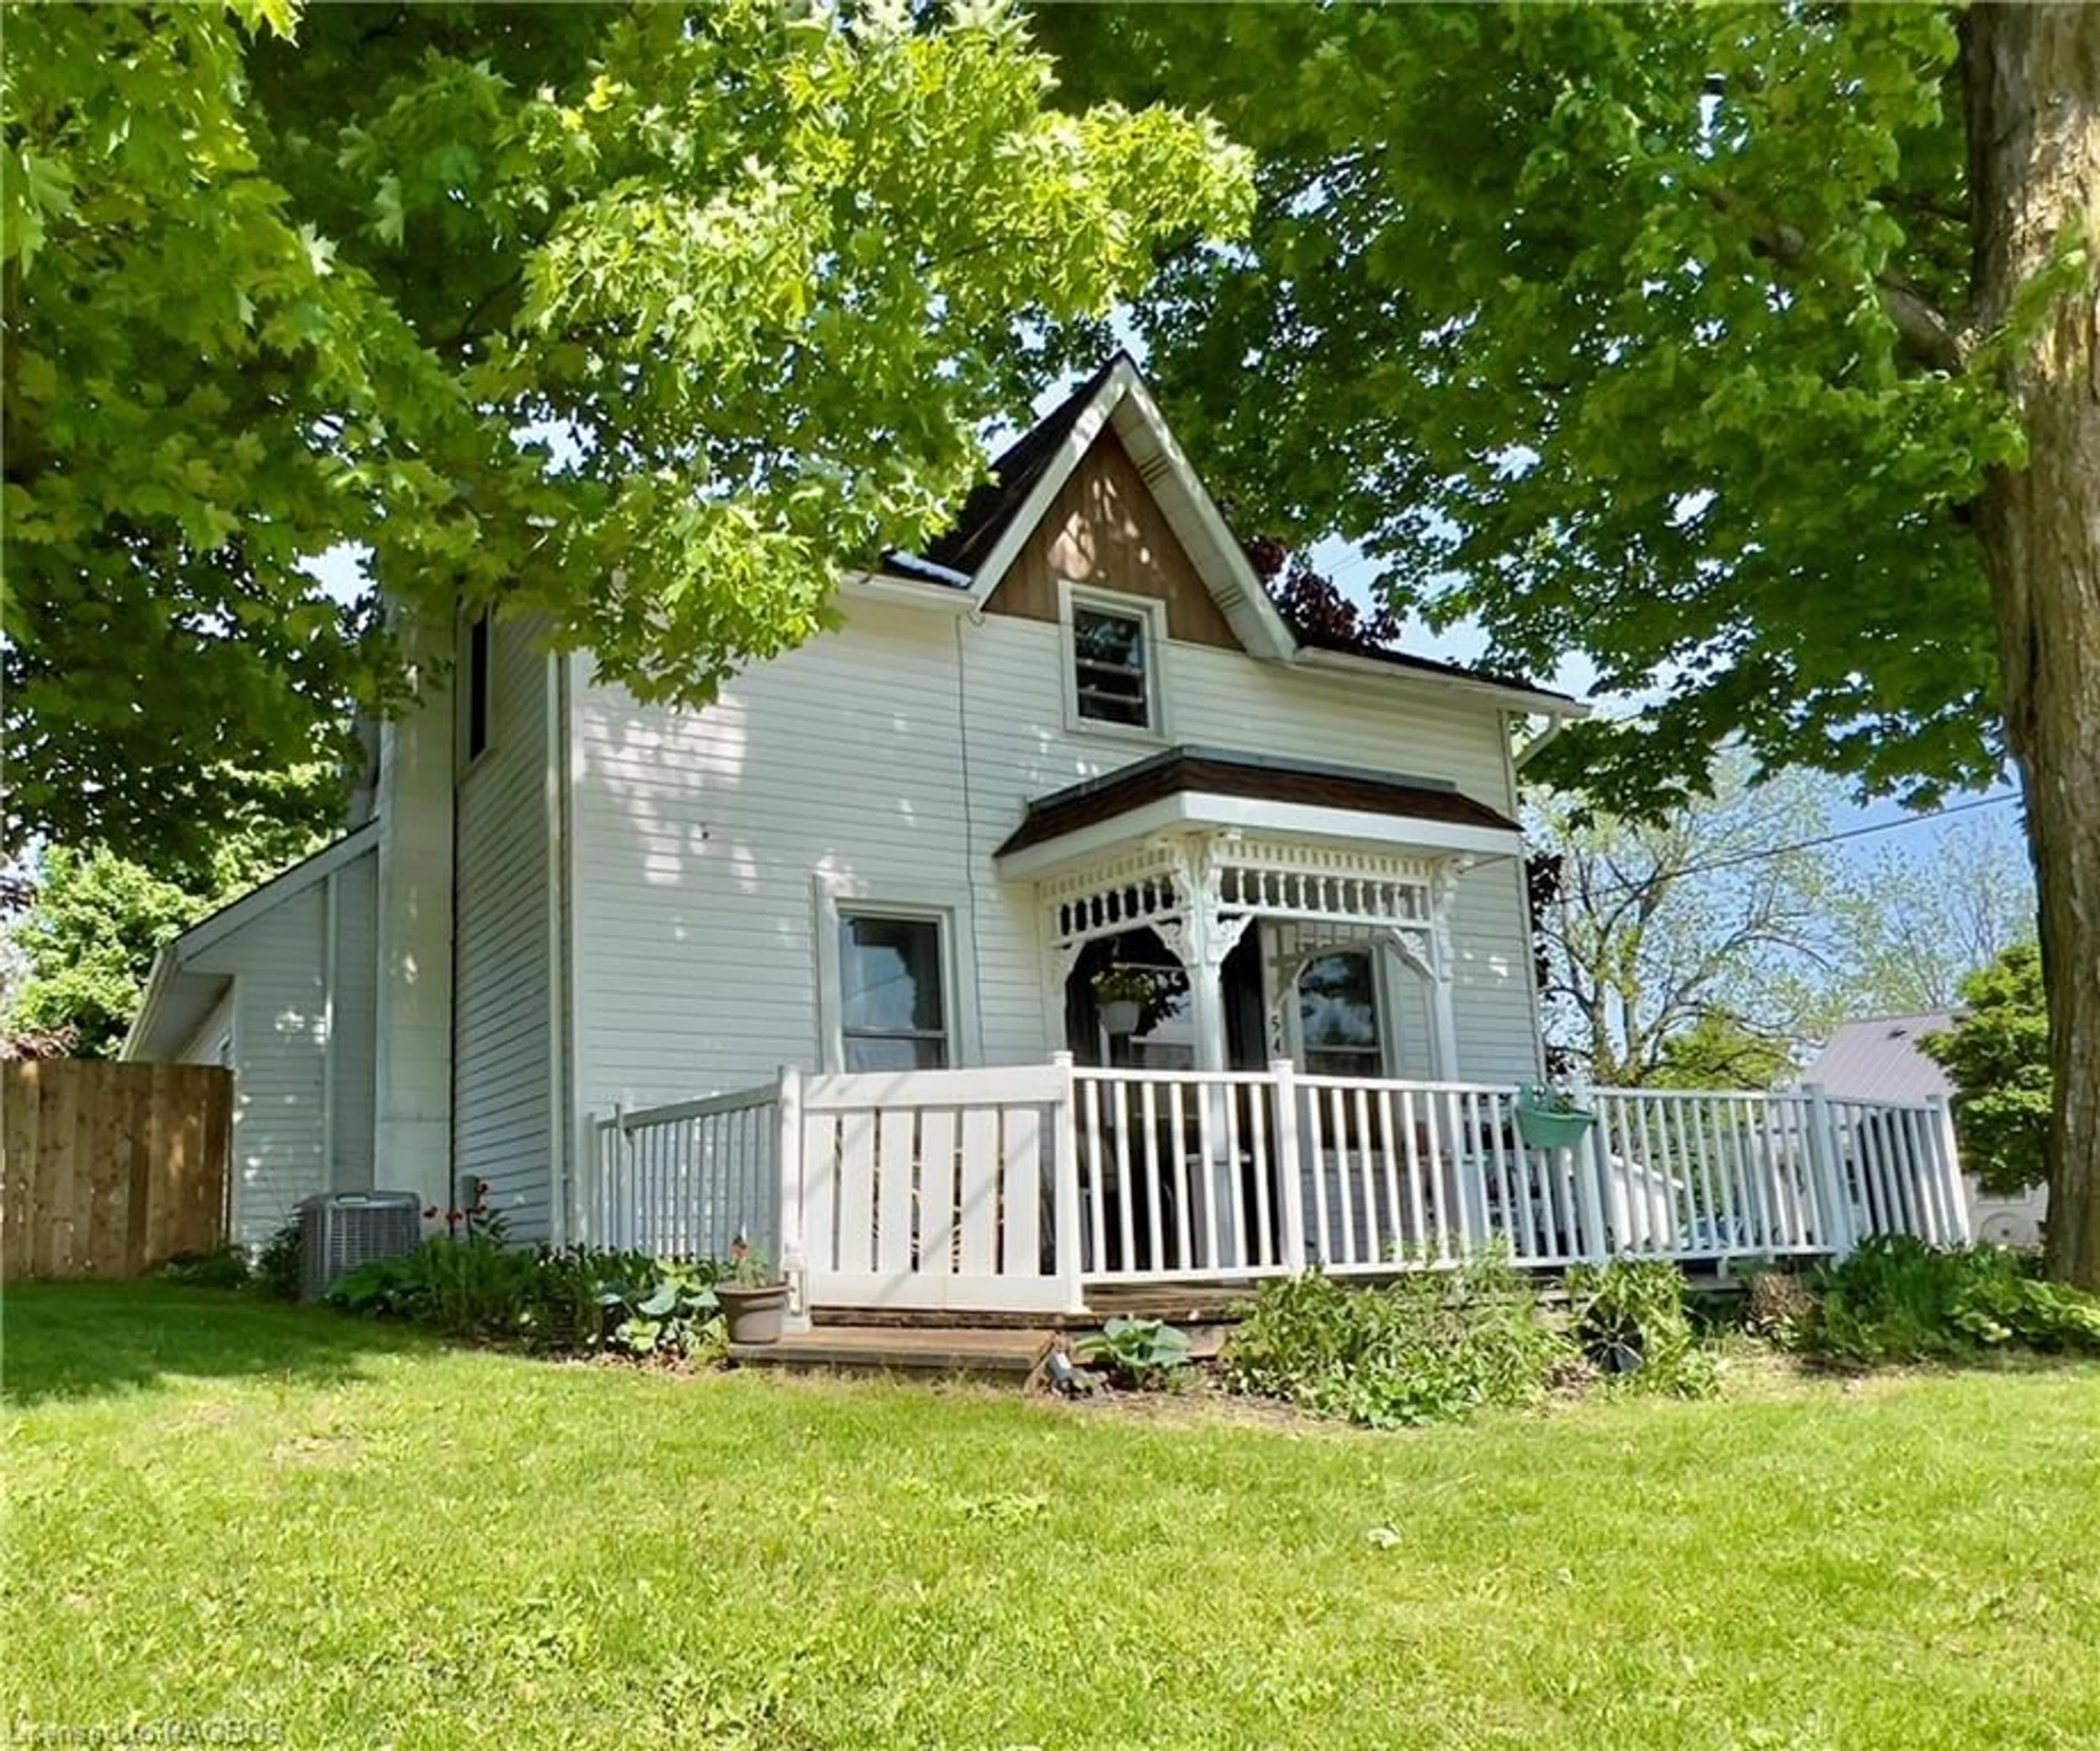 Cottage for 540 Victoria St, Lucknow Ontario N0G 2H0